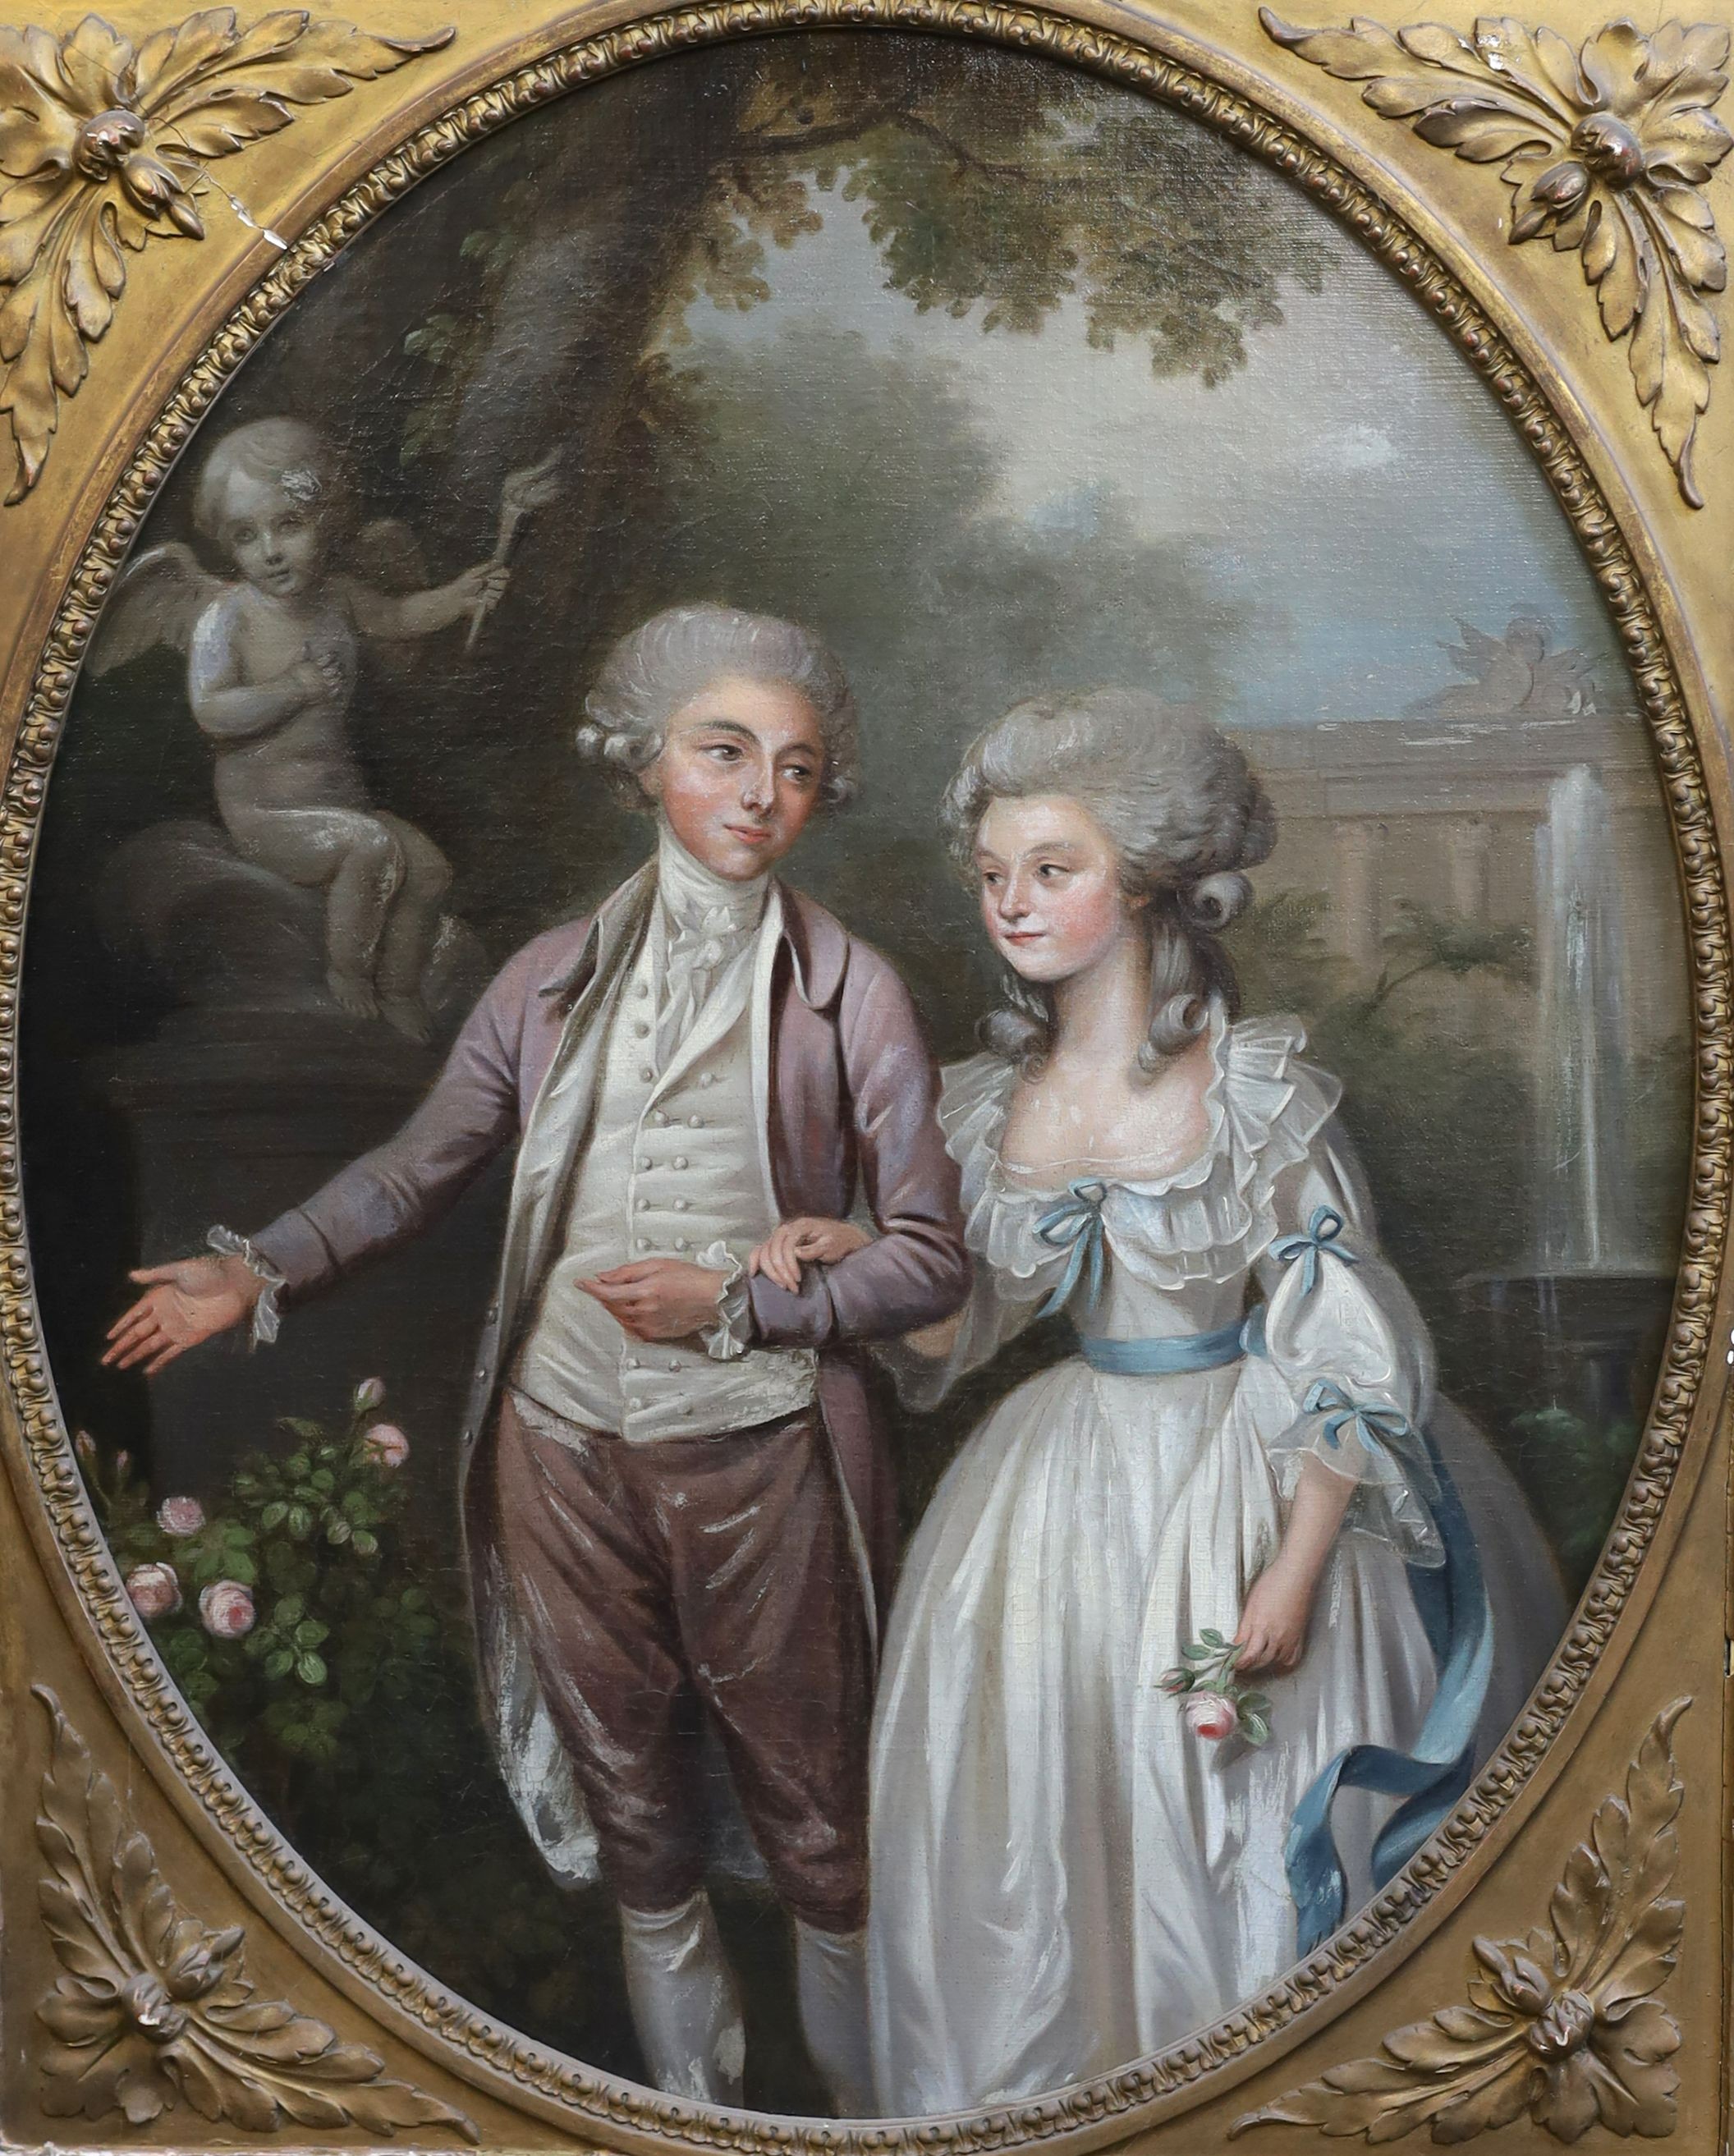 Late 18th century English School, Three quarter length portrait of a husband and wife admiring roses in an Italianate garden, oil on canvas, oval, 71 x 57cm